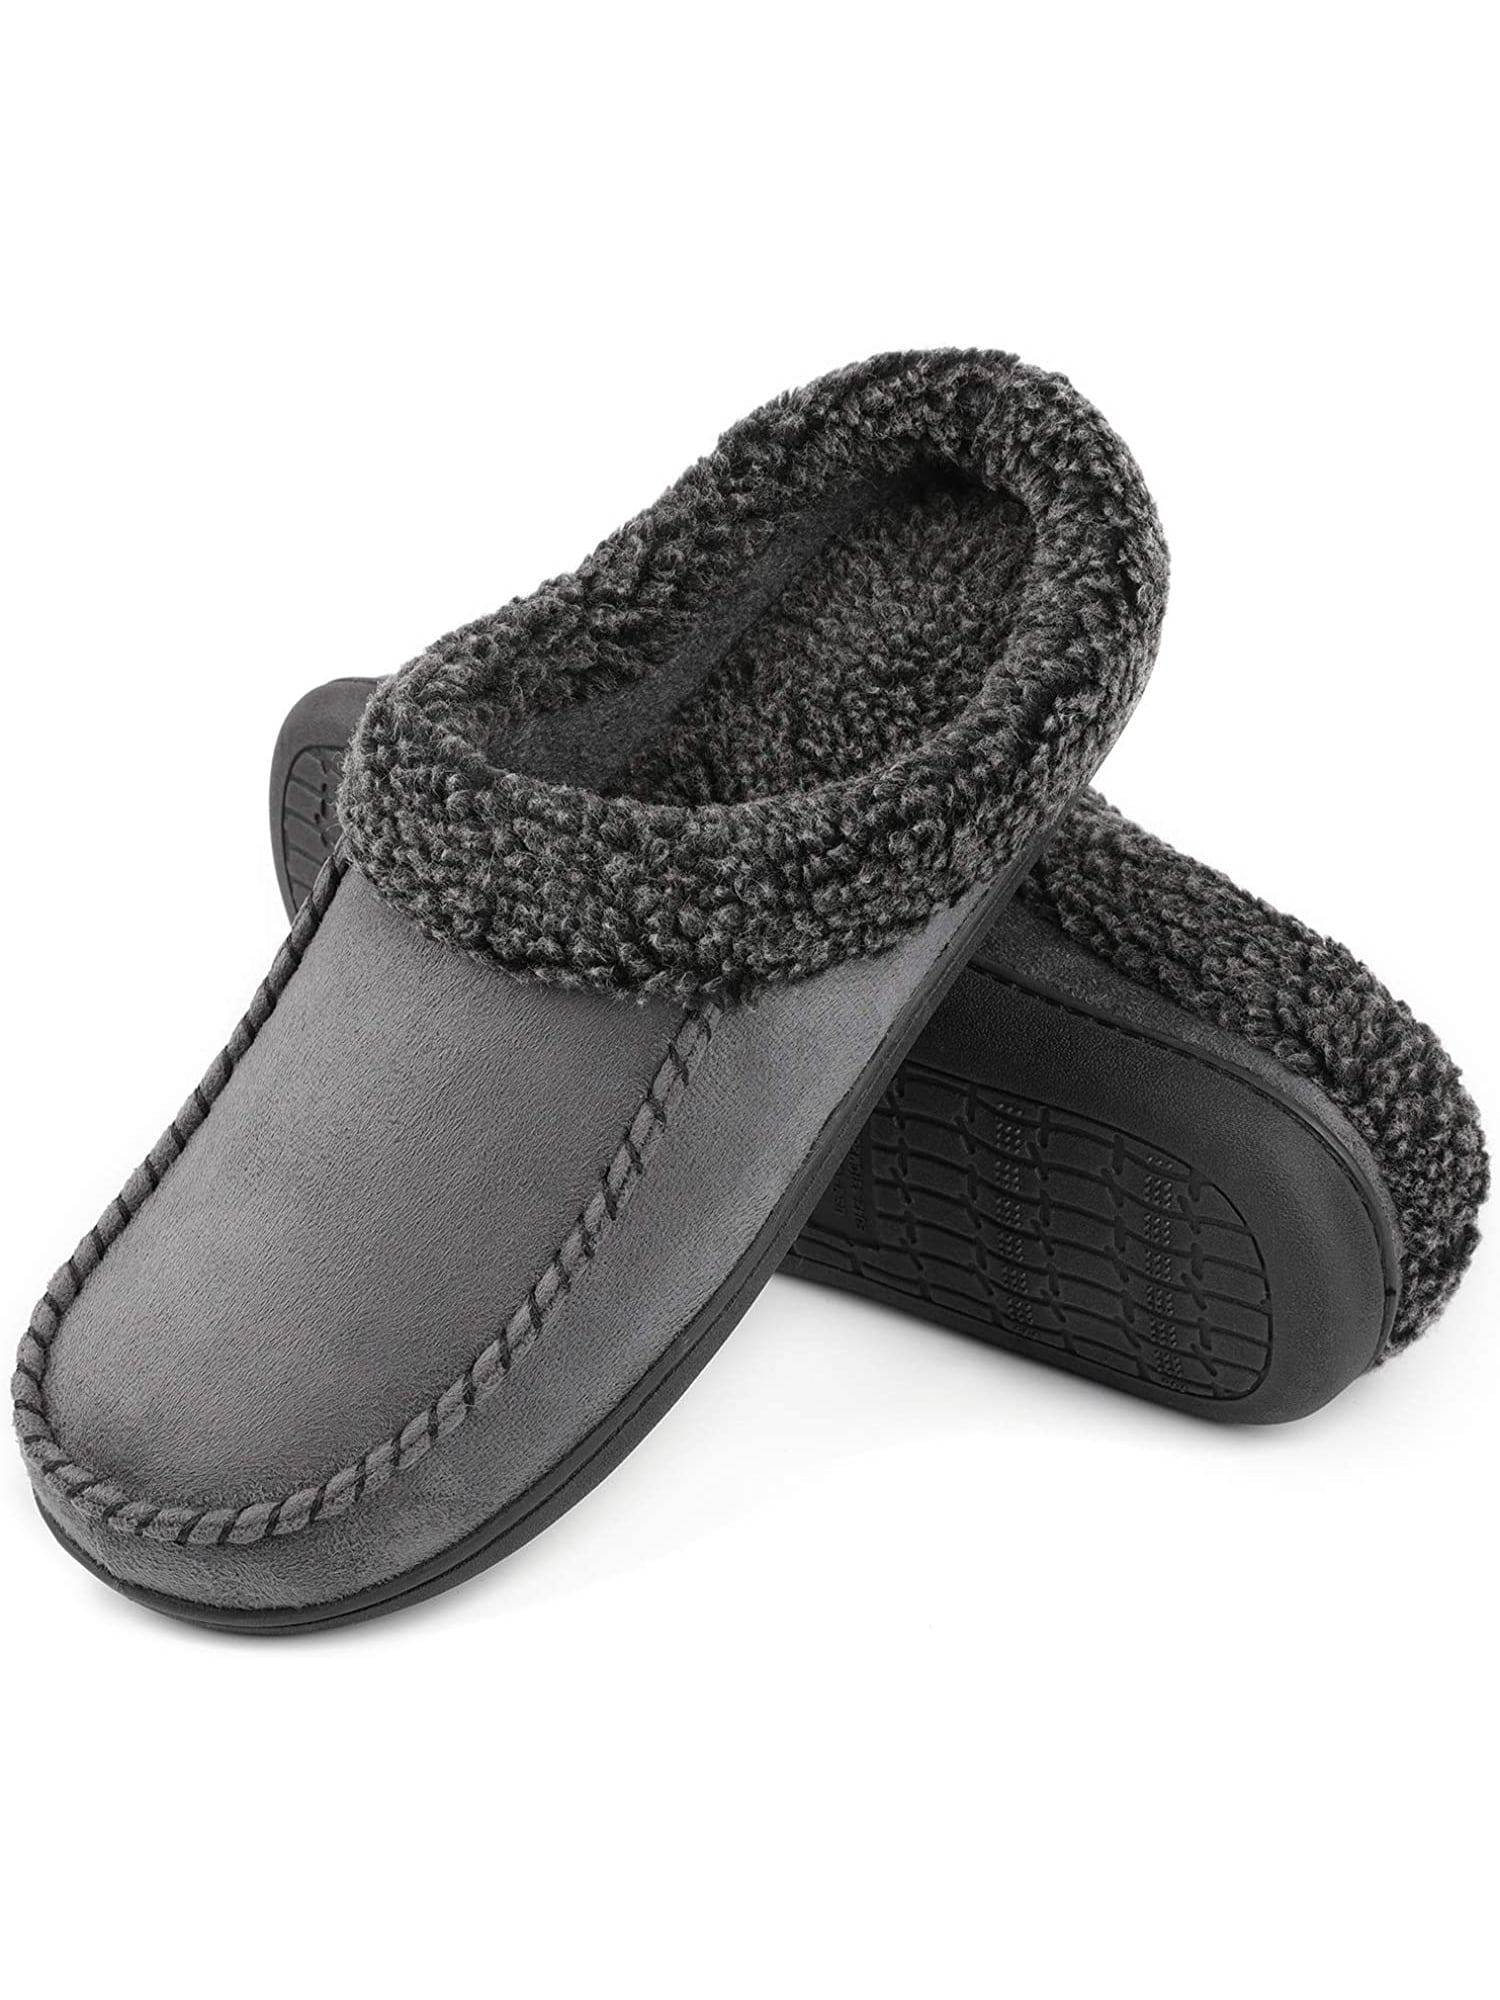 Closed Back House Shoes with Anti-Skid Rubber Sole ULTRAIDEAS Men’s Cozy Memory Foam Moccasin Slippers with Fuzzy Fur Lining 